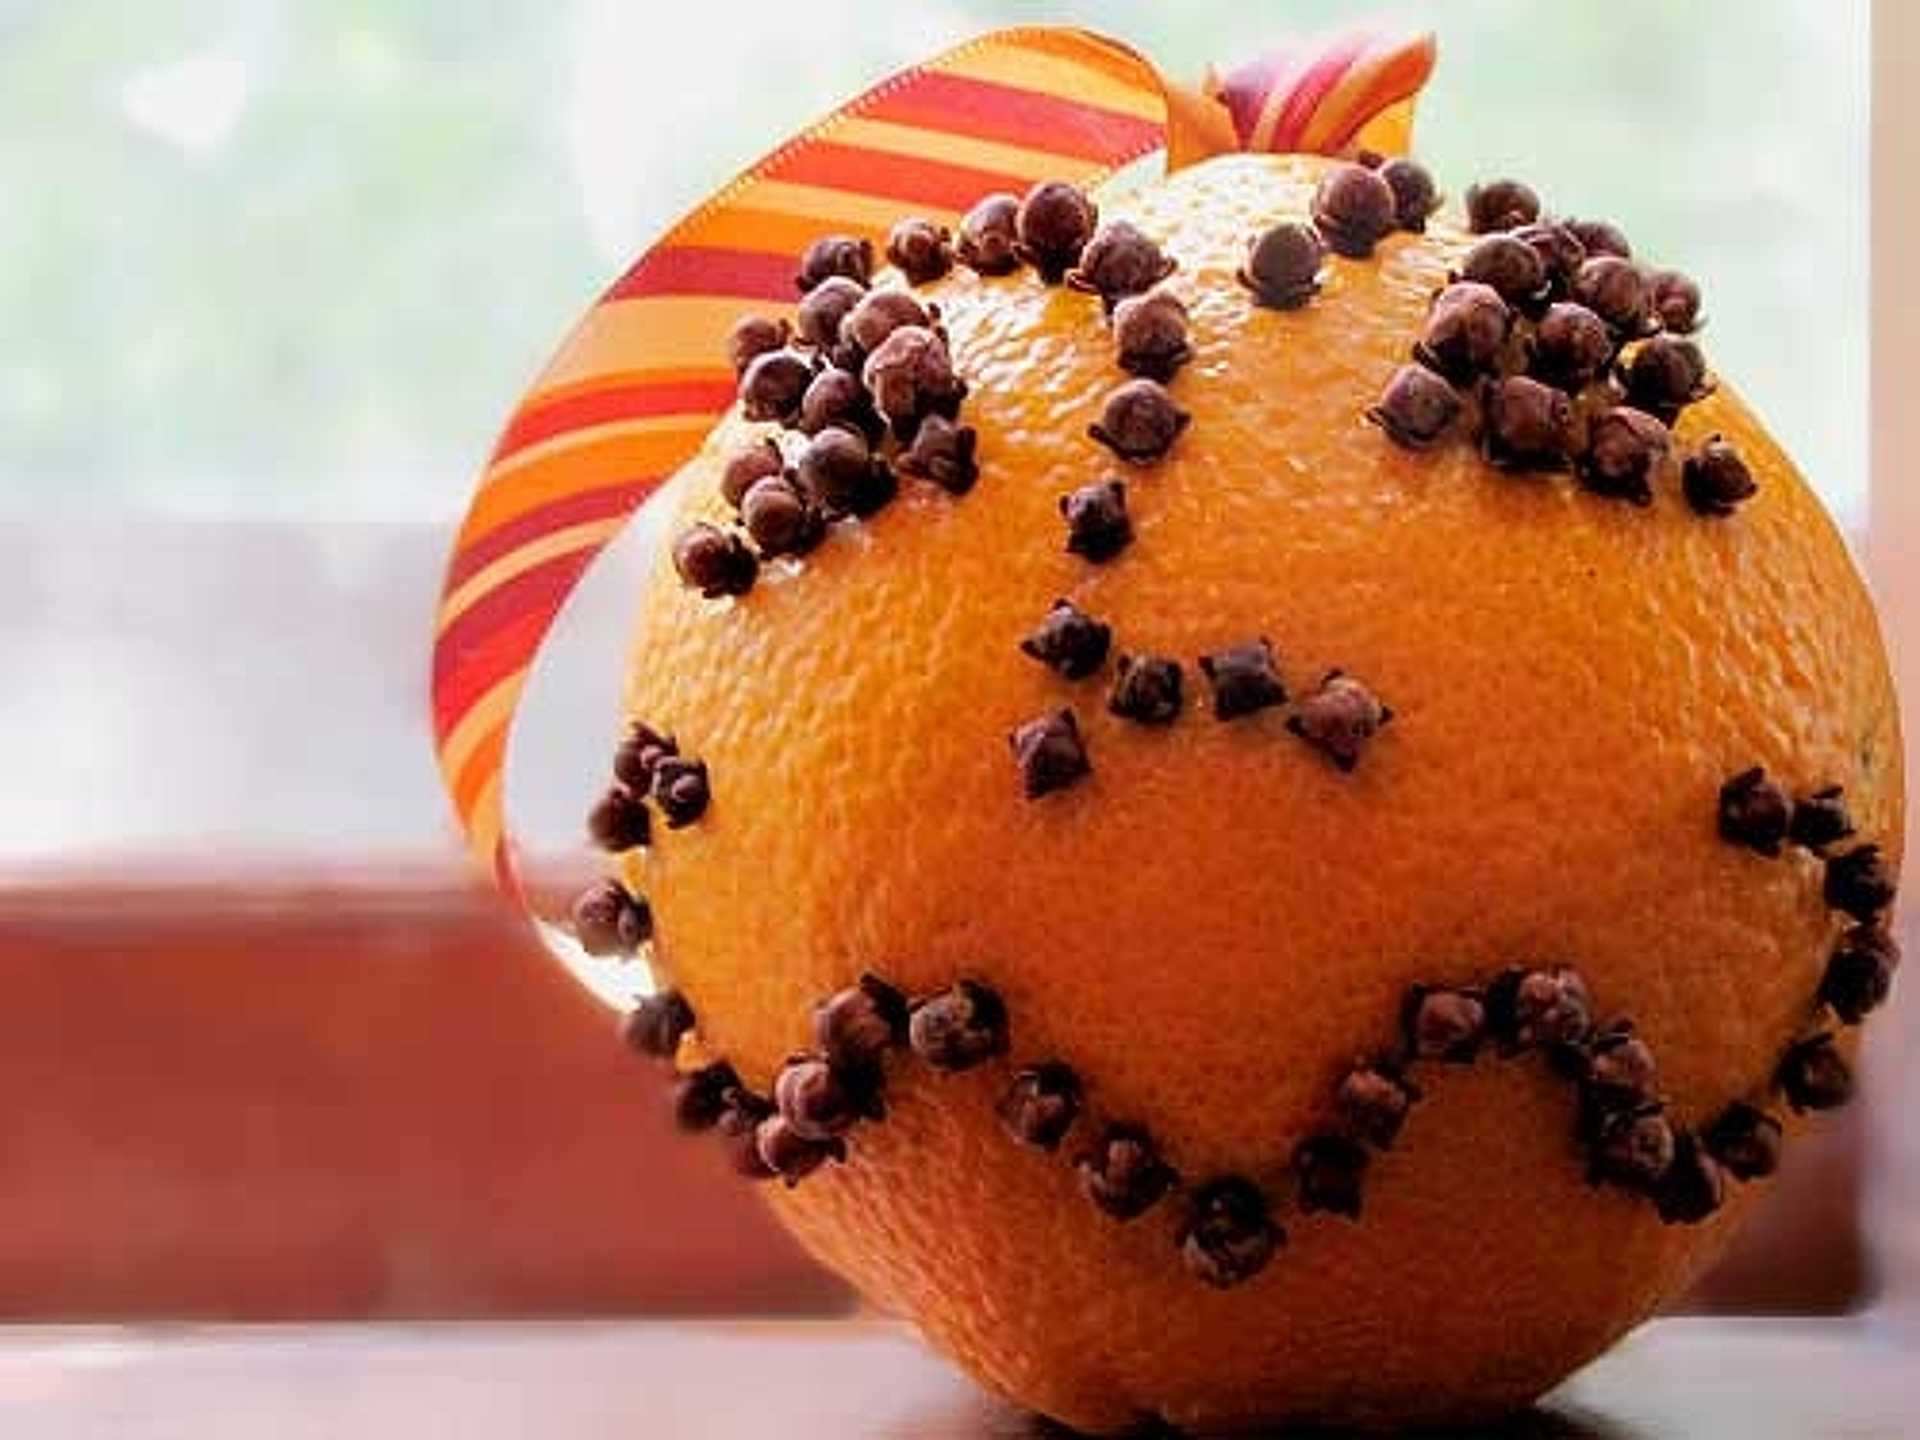 3. Orange decorated with carnations